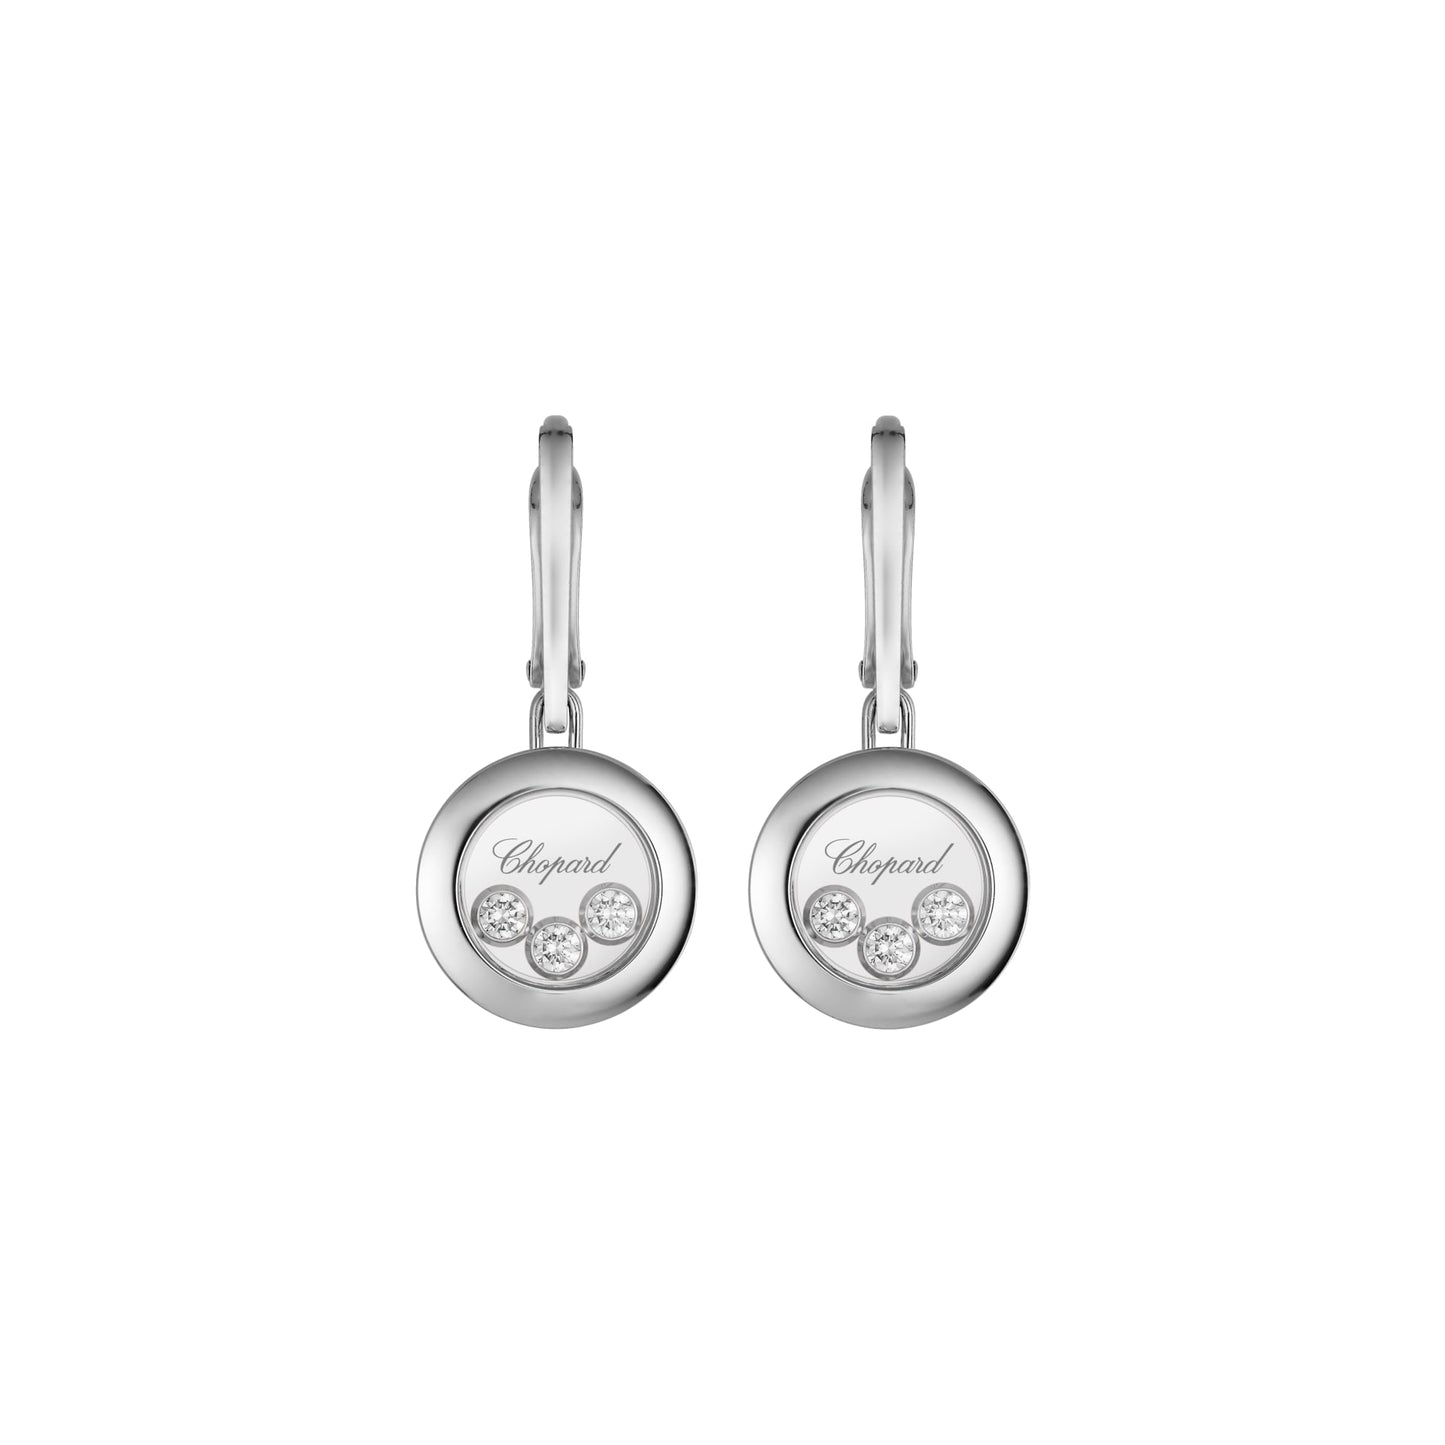 HAPPY DIAMONDS ICONS EARRINGS, ETHICAL WHITE GOLD, DIAMONDS 83A018-1301